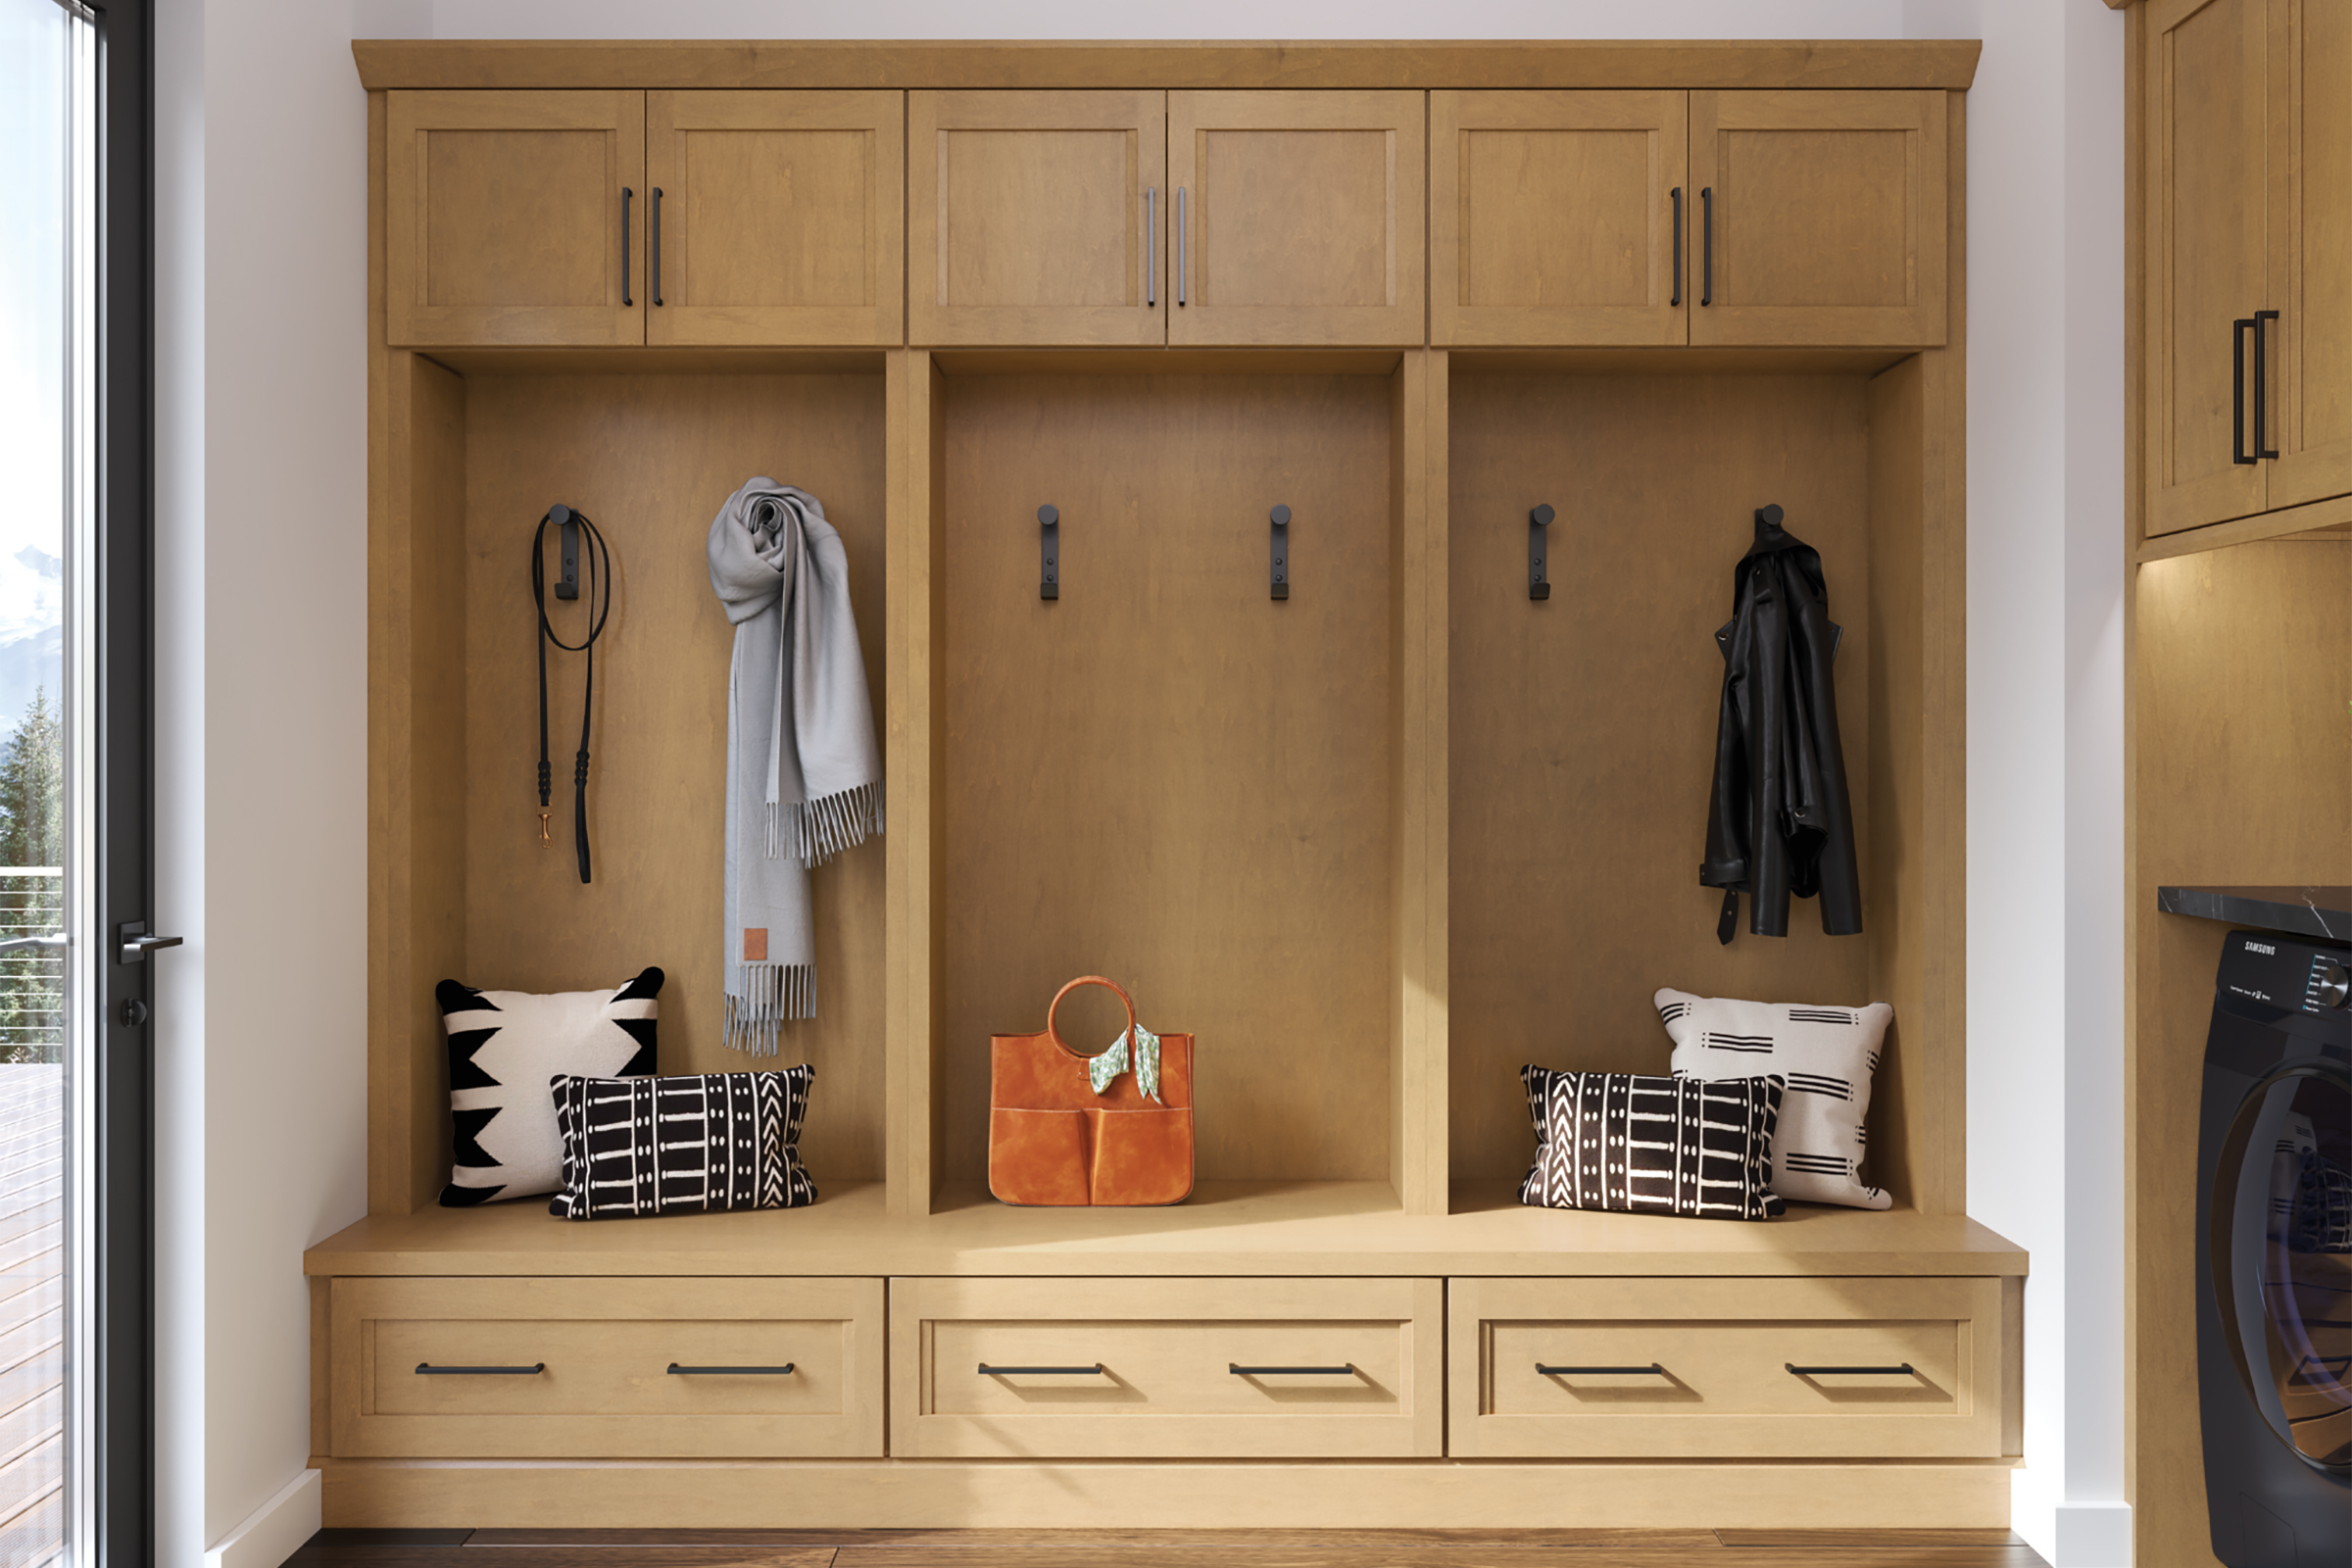 KraftMaid Mudroom locker cabinets for hanging coats and housing shoes